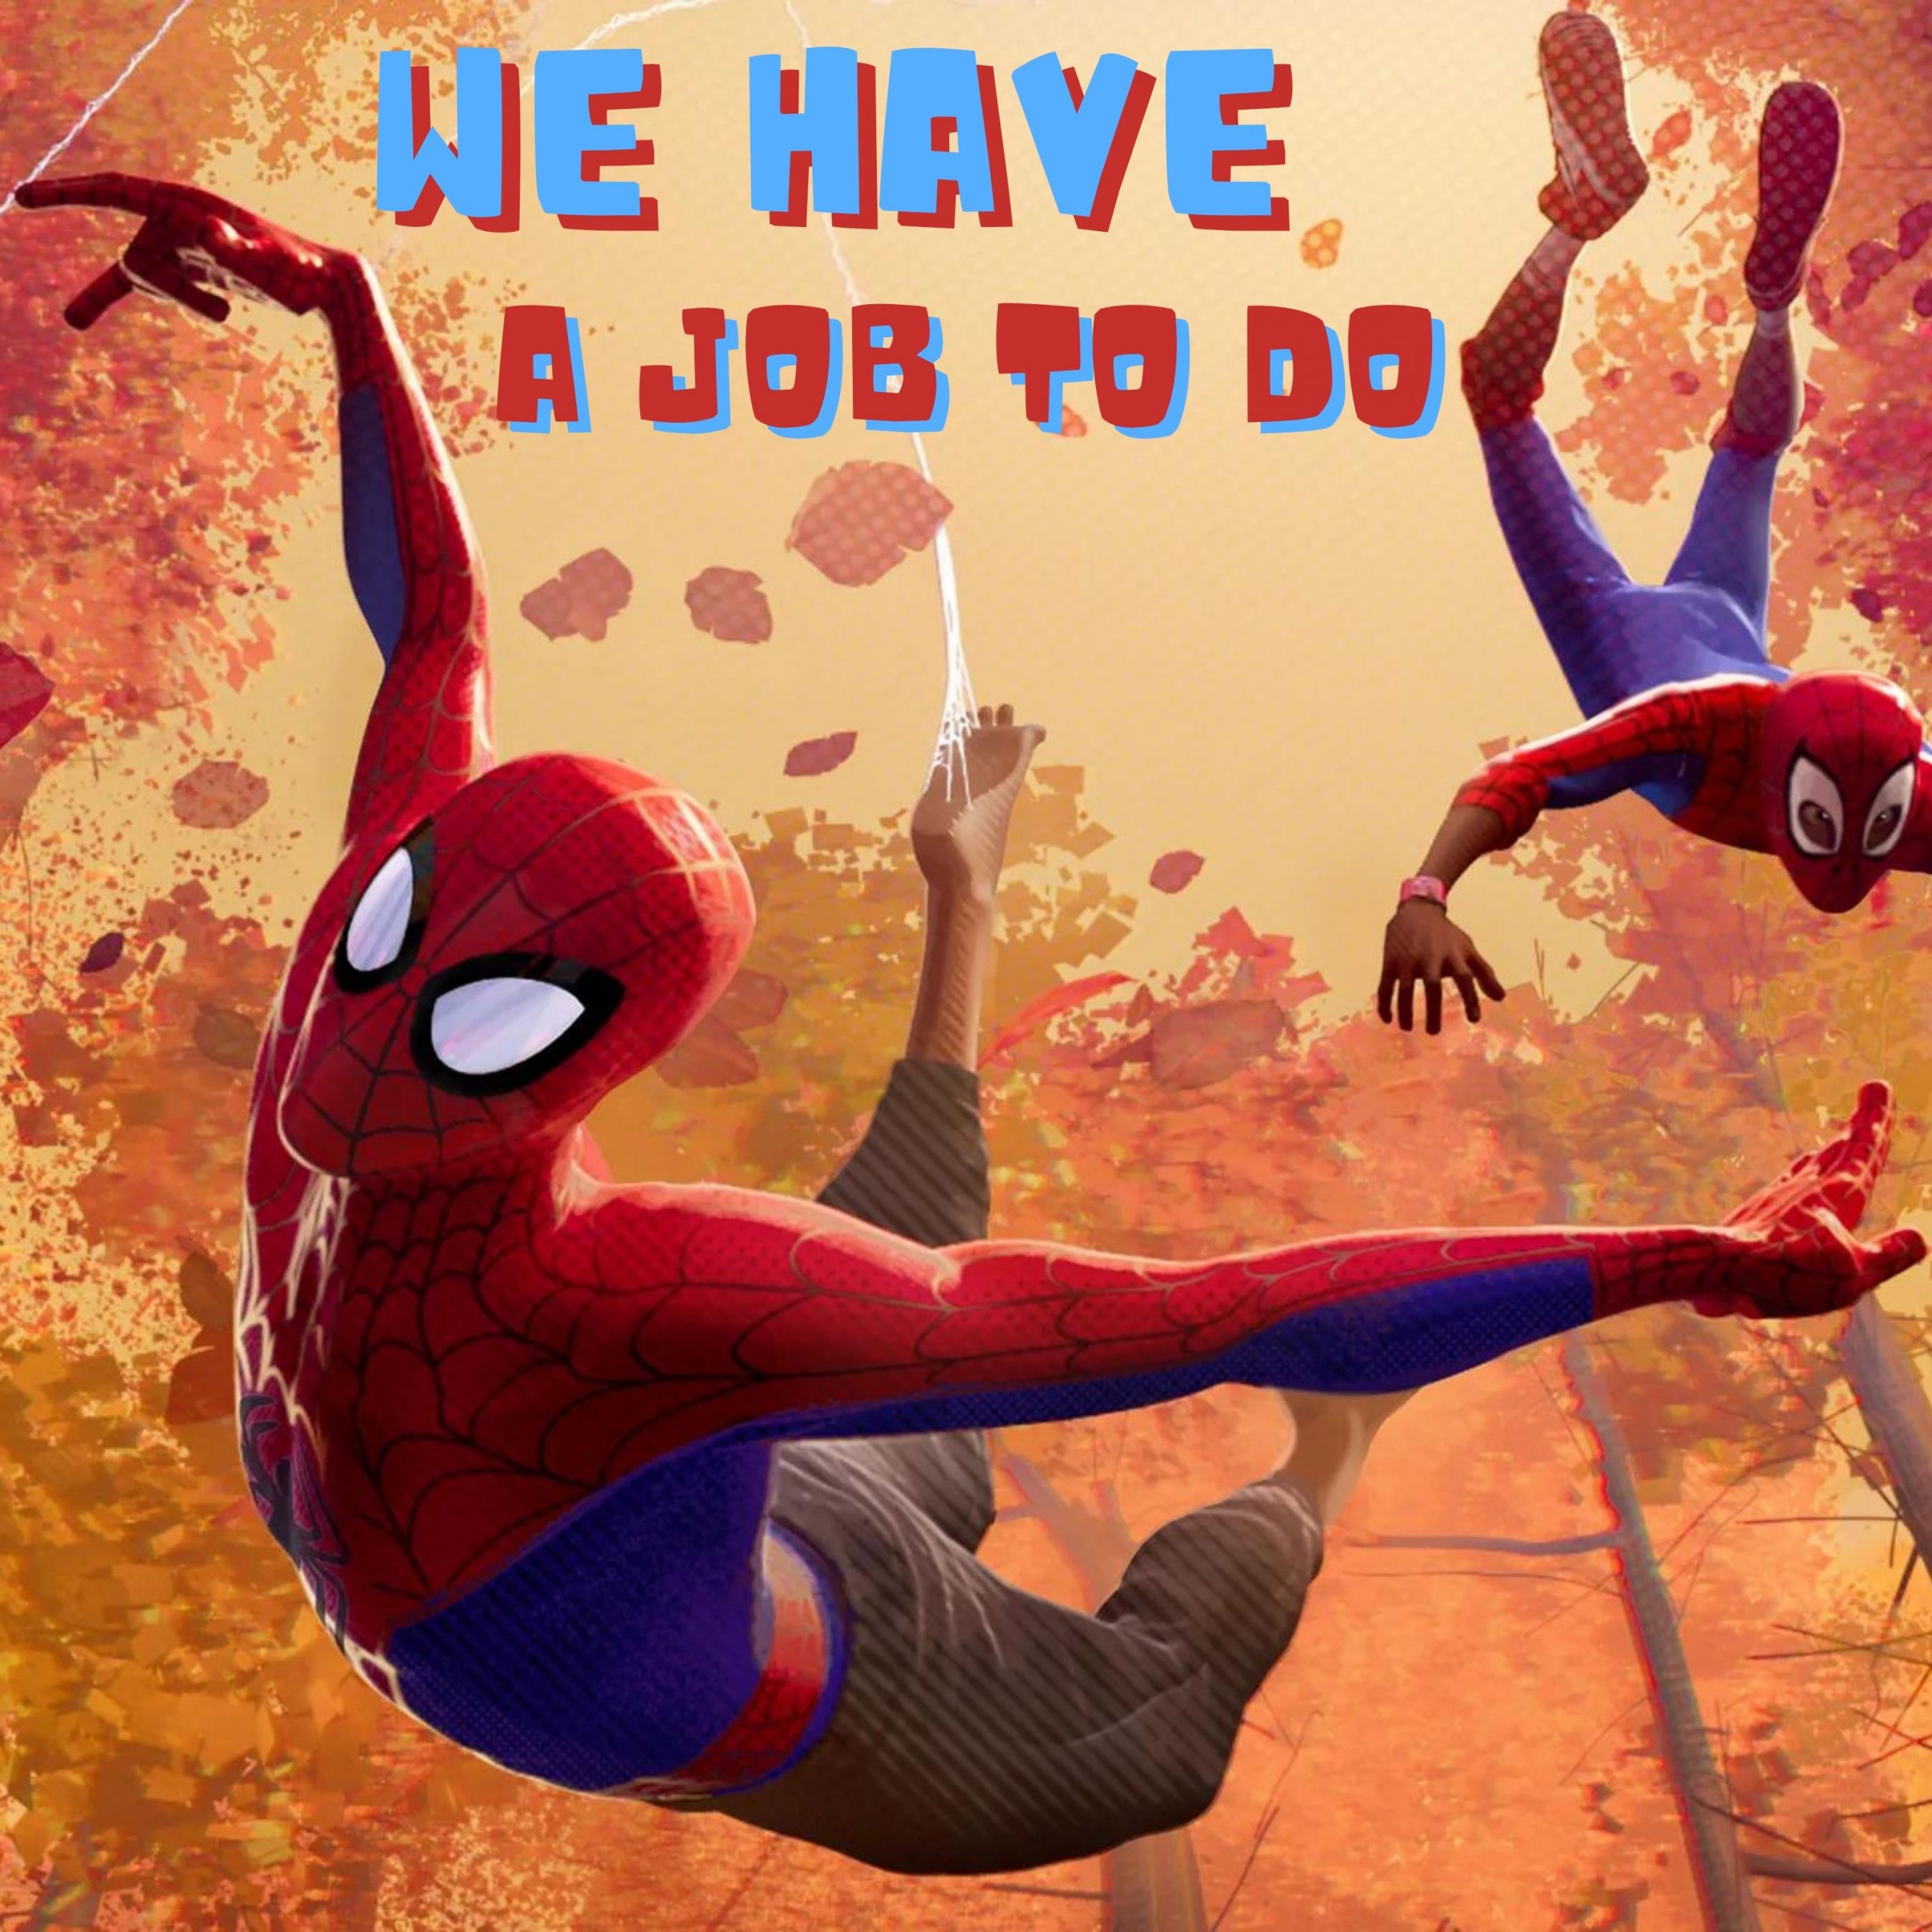 iPad Pro 12.9 wallpapers We Have a Job to Do Duo Spiderman Ipad Wallpaper